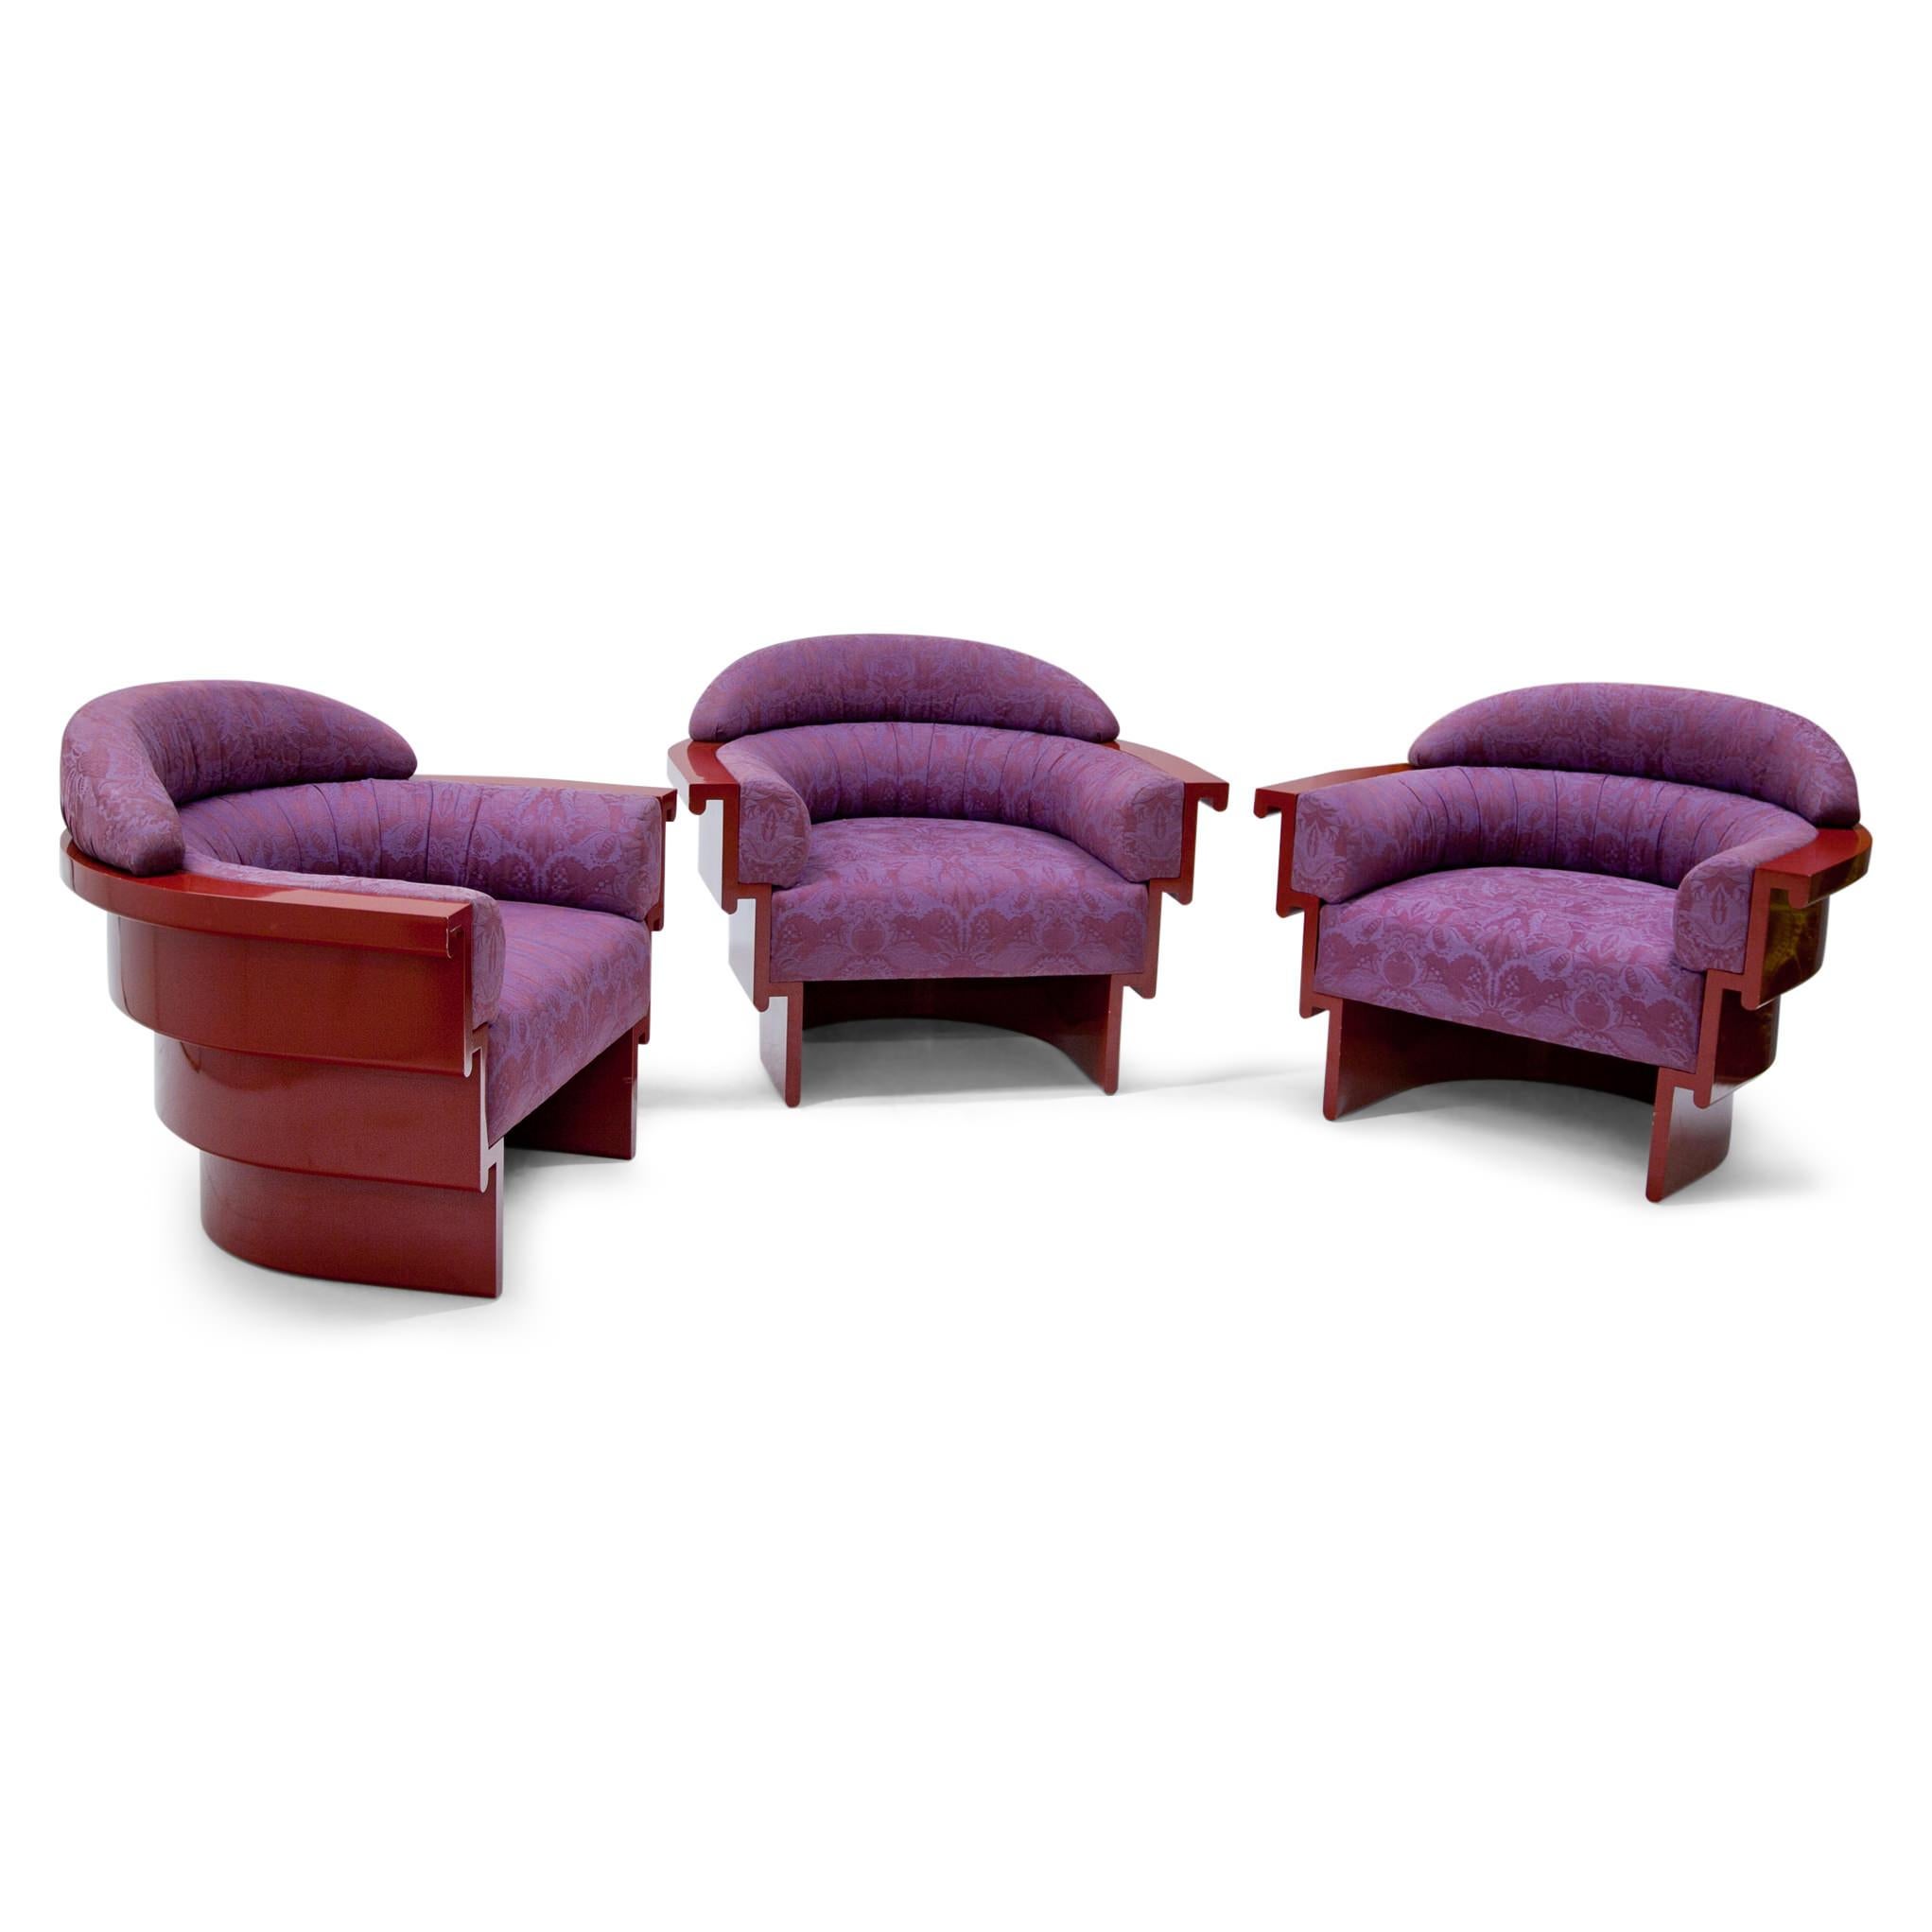 Set of 12 red-lacquered lounge chairs with cushioned seats and a stepped frame and a very large, red-lacquered coffee table with a round basin for plants in the middle as well as pullout shelfing units underneath the tabletop (Ø 240 cm). The table